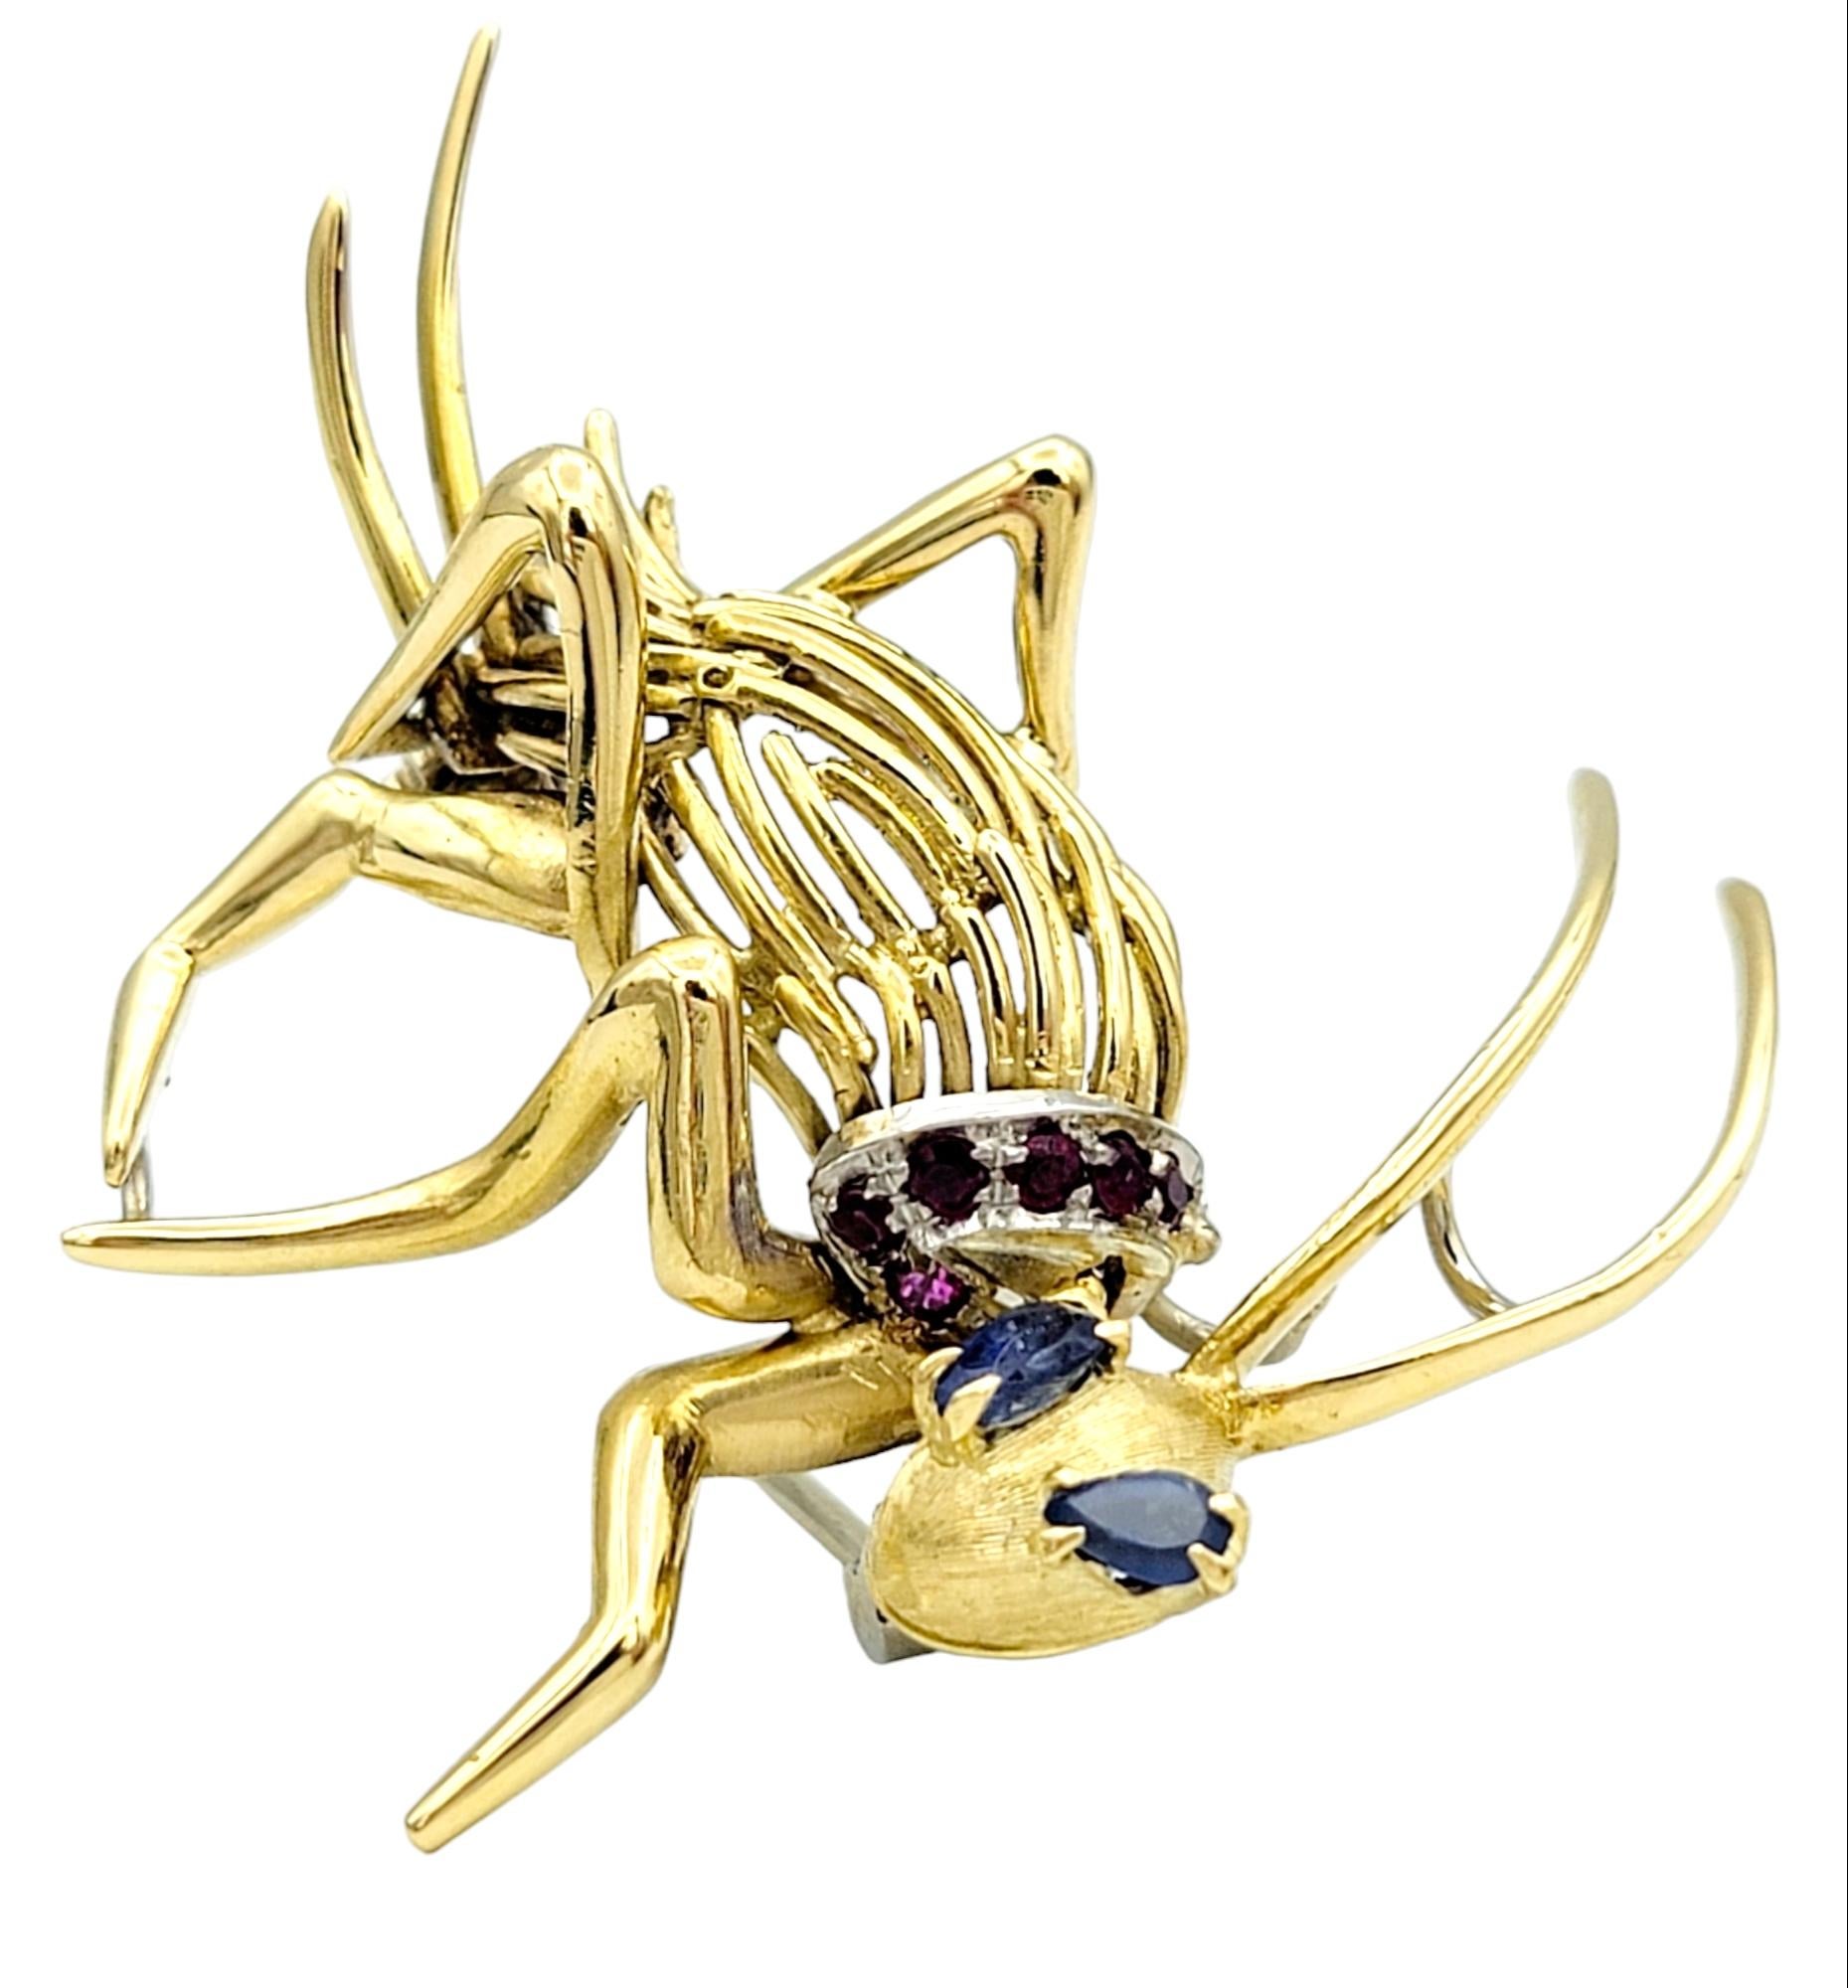 Contemporary Playful 14 Karat Yellow Gold Cricket Brooch with Sapphire and Ruby Accents  For Sale